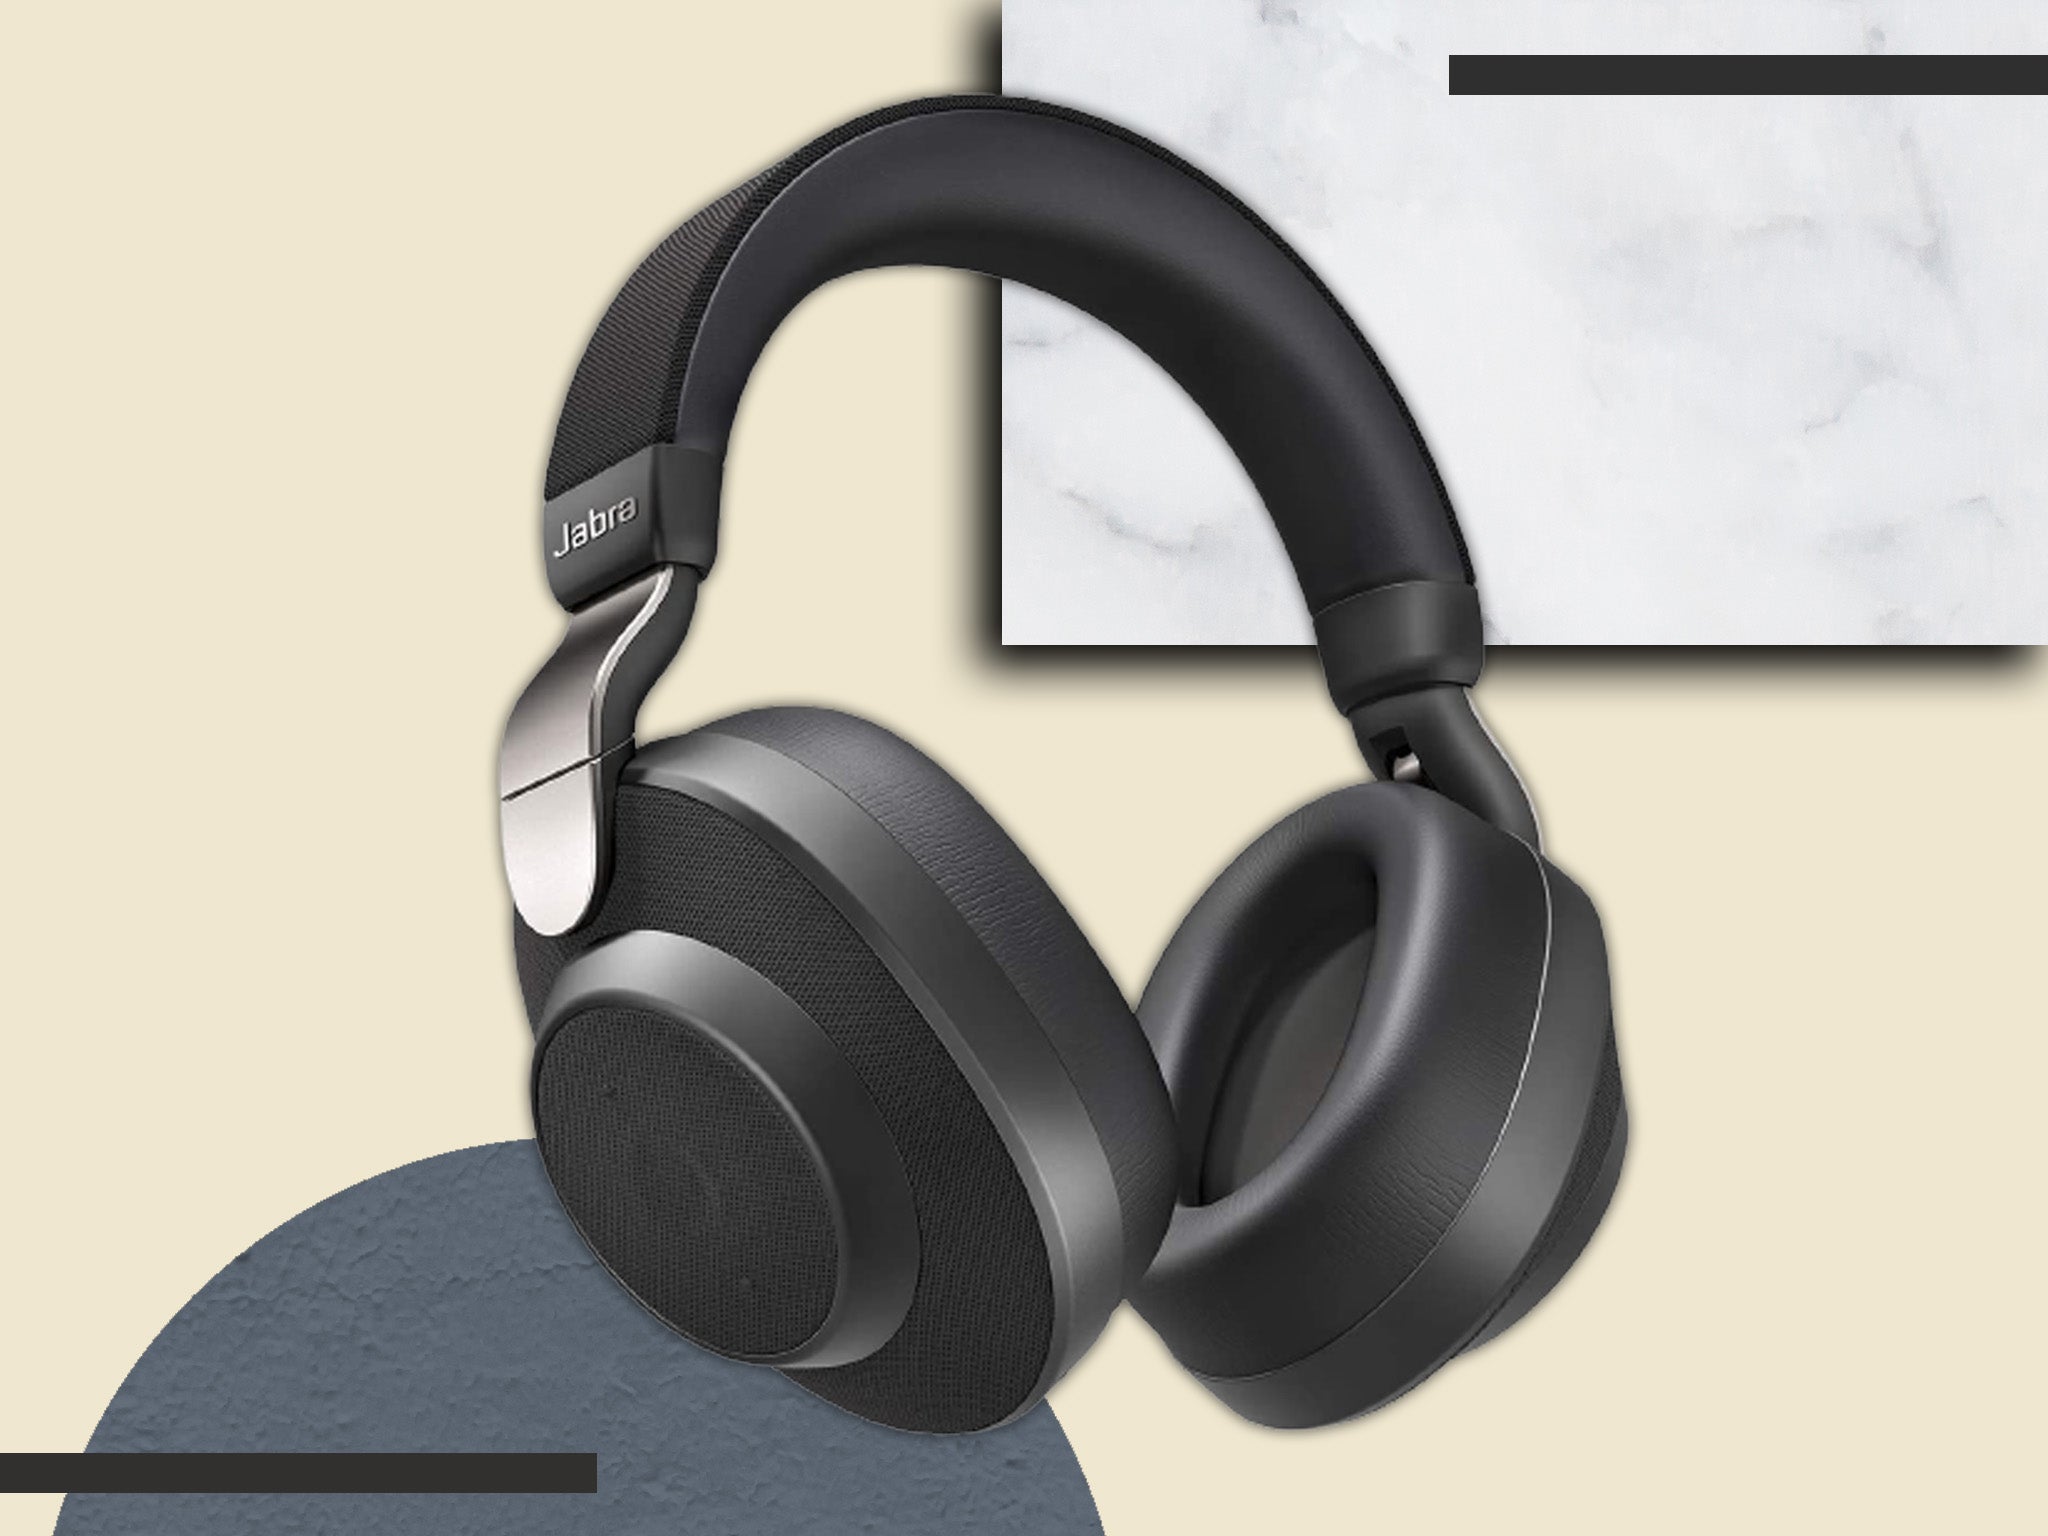 Fantastic sound, wireless connection and active noise cancellation at a price that blows most other headphones out of the water